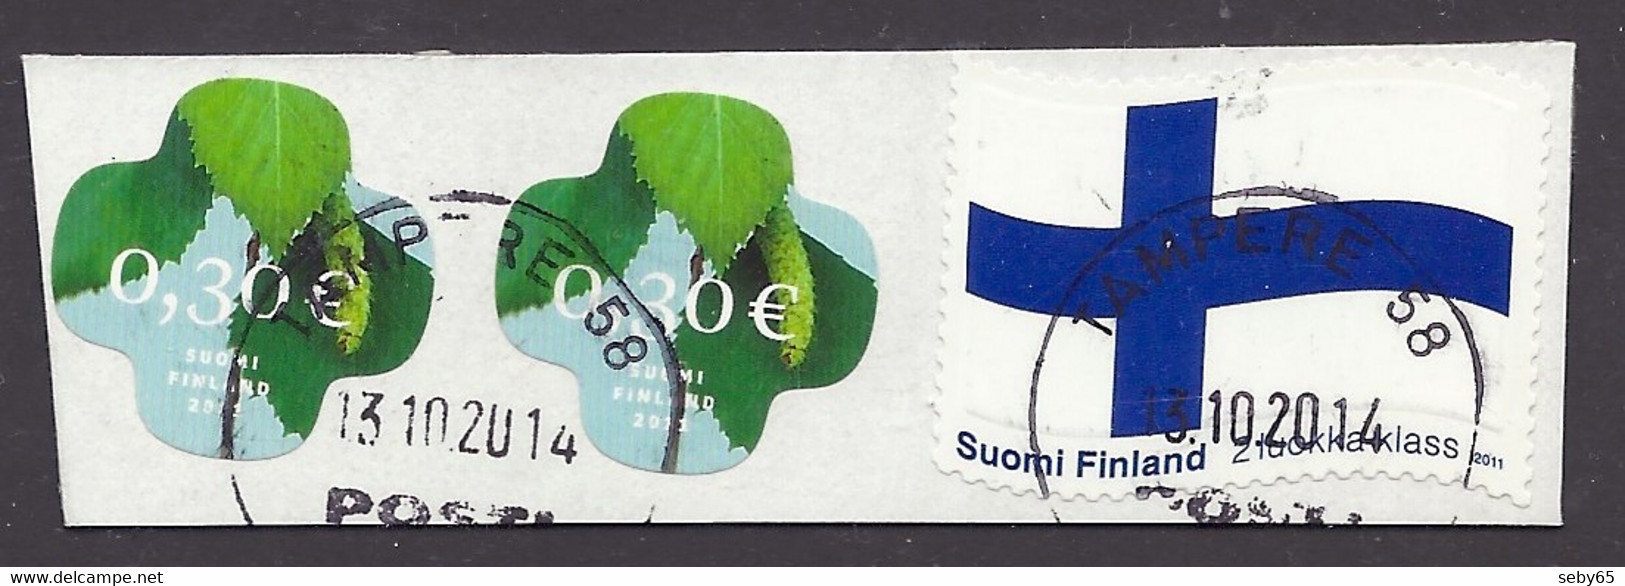 Finland 2011 - Flag, Flags, Drapeau, Nature Leaves, Self-adhesive On Paper Fragment - Used - Gebraucht